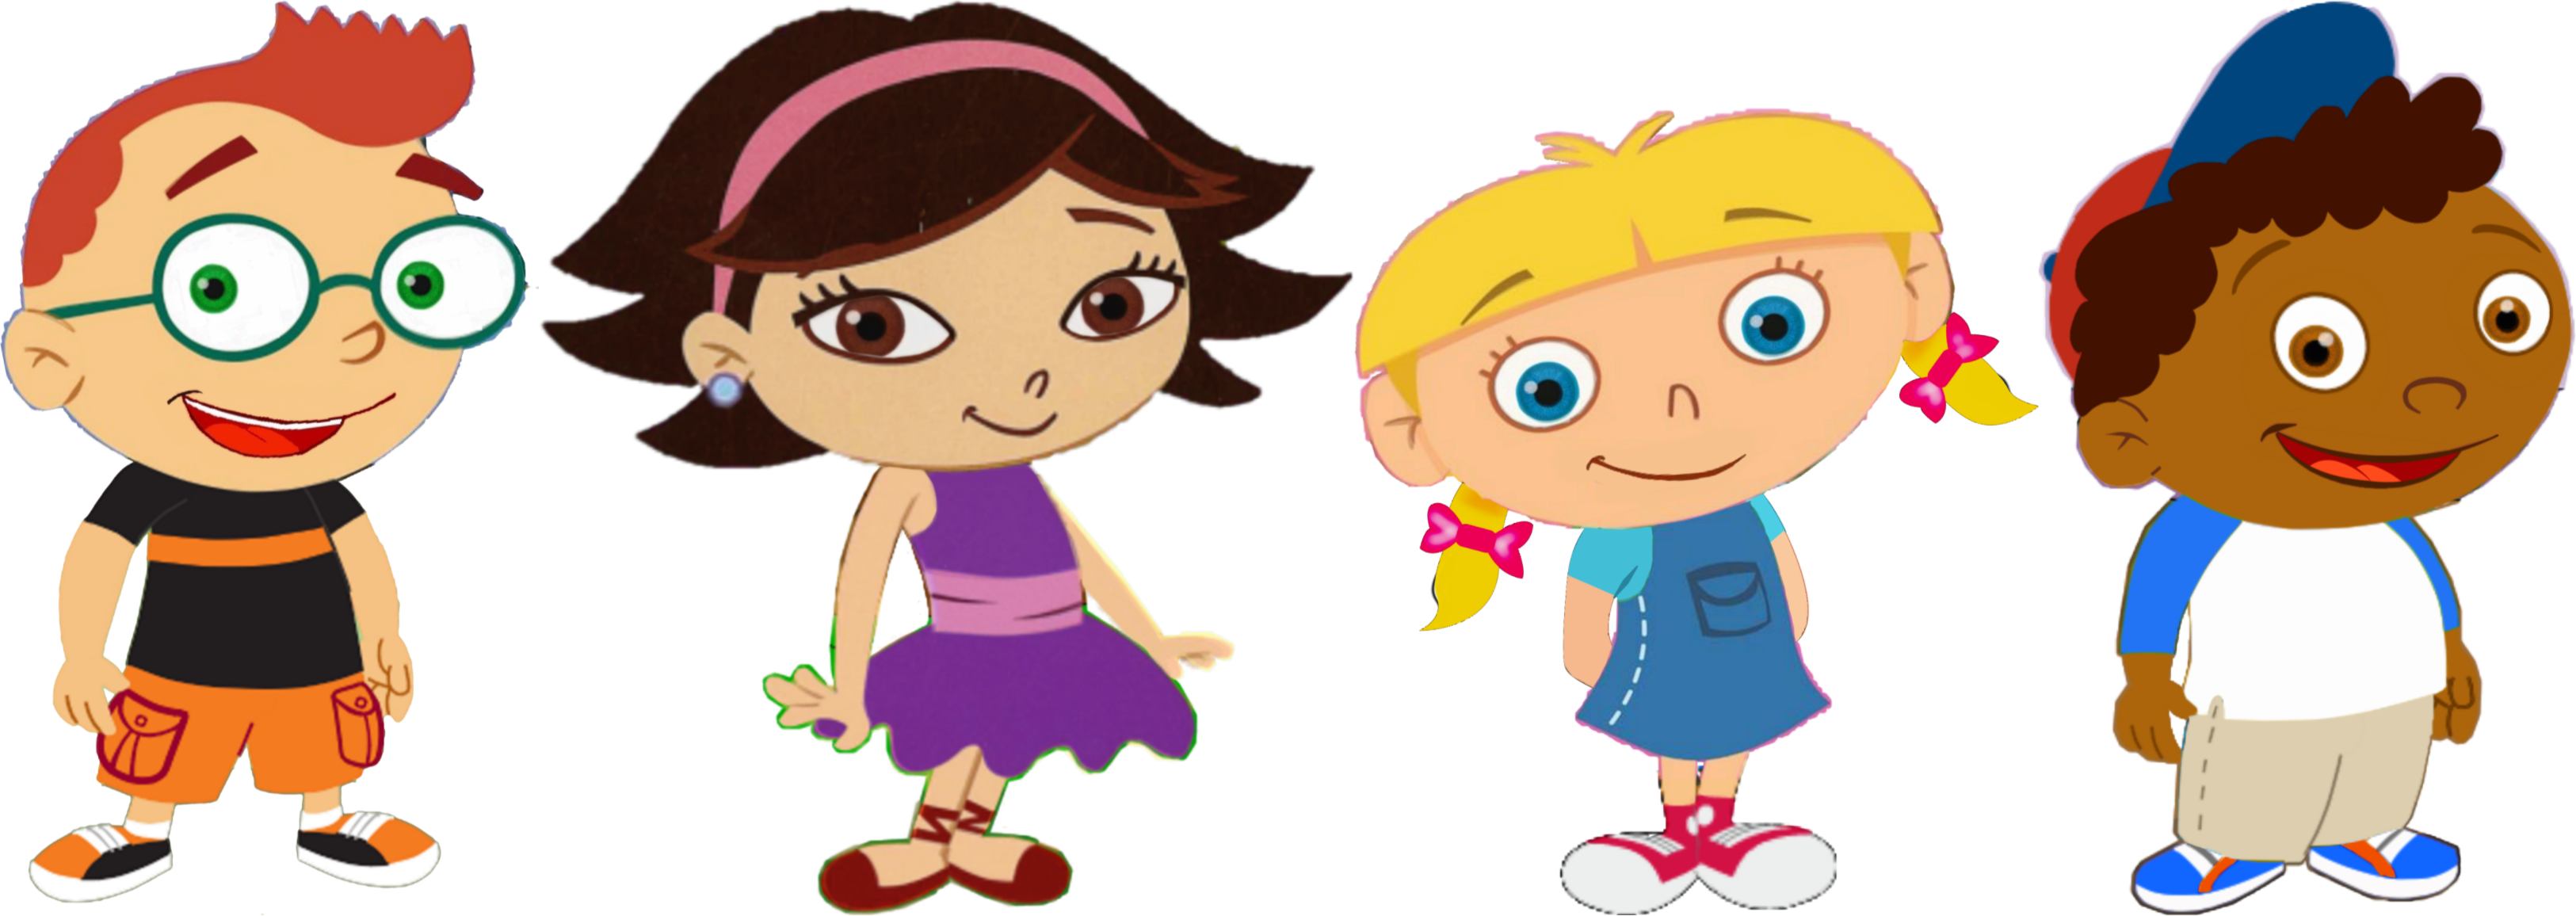 Cartoon Girls In Dresses And Shoes